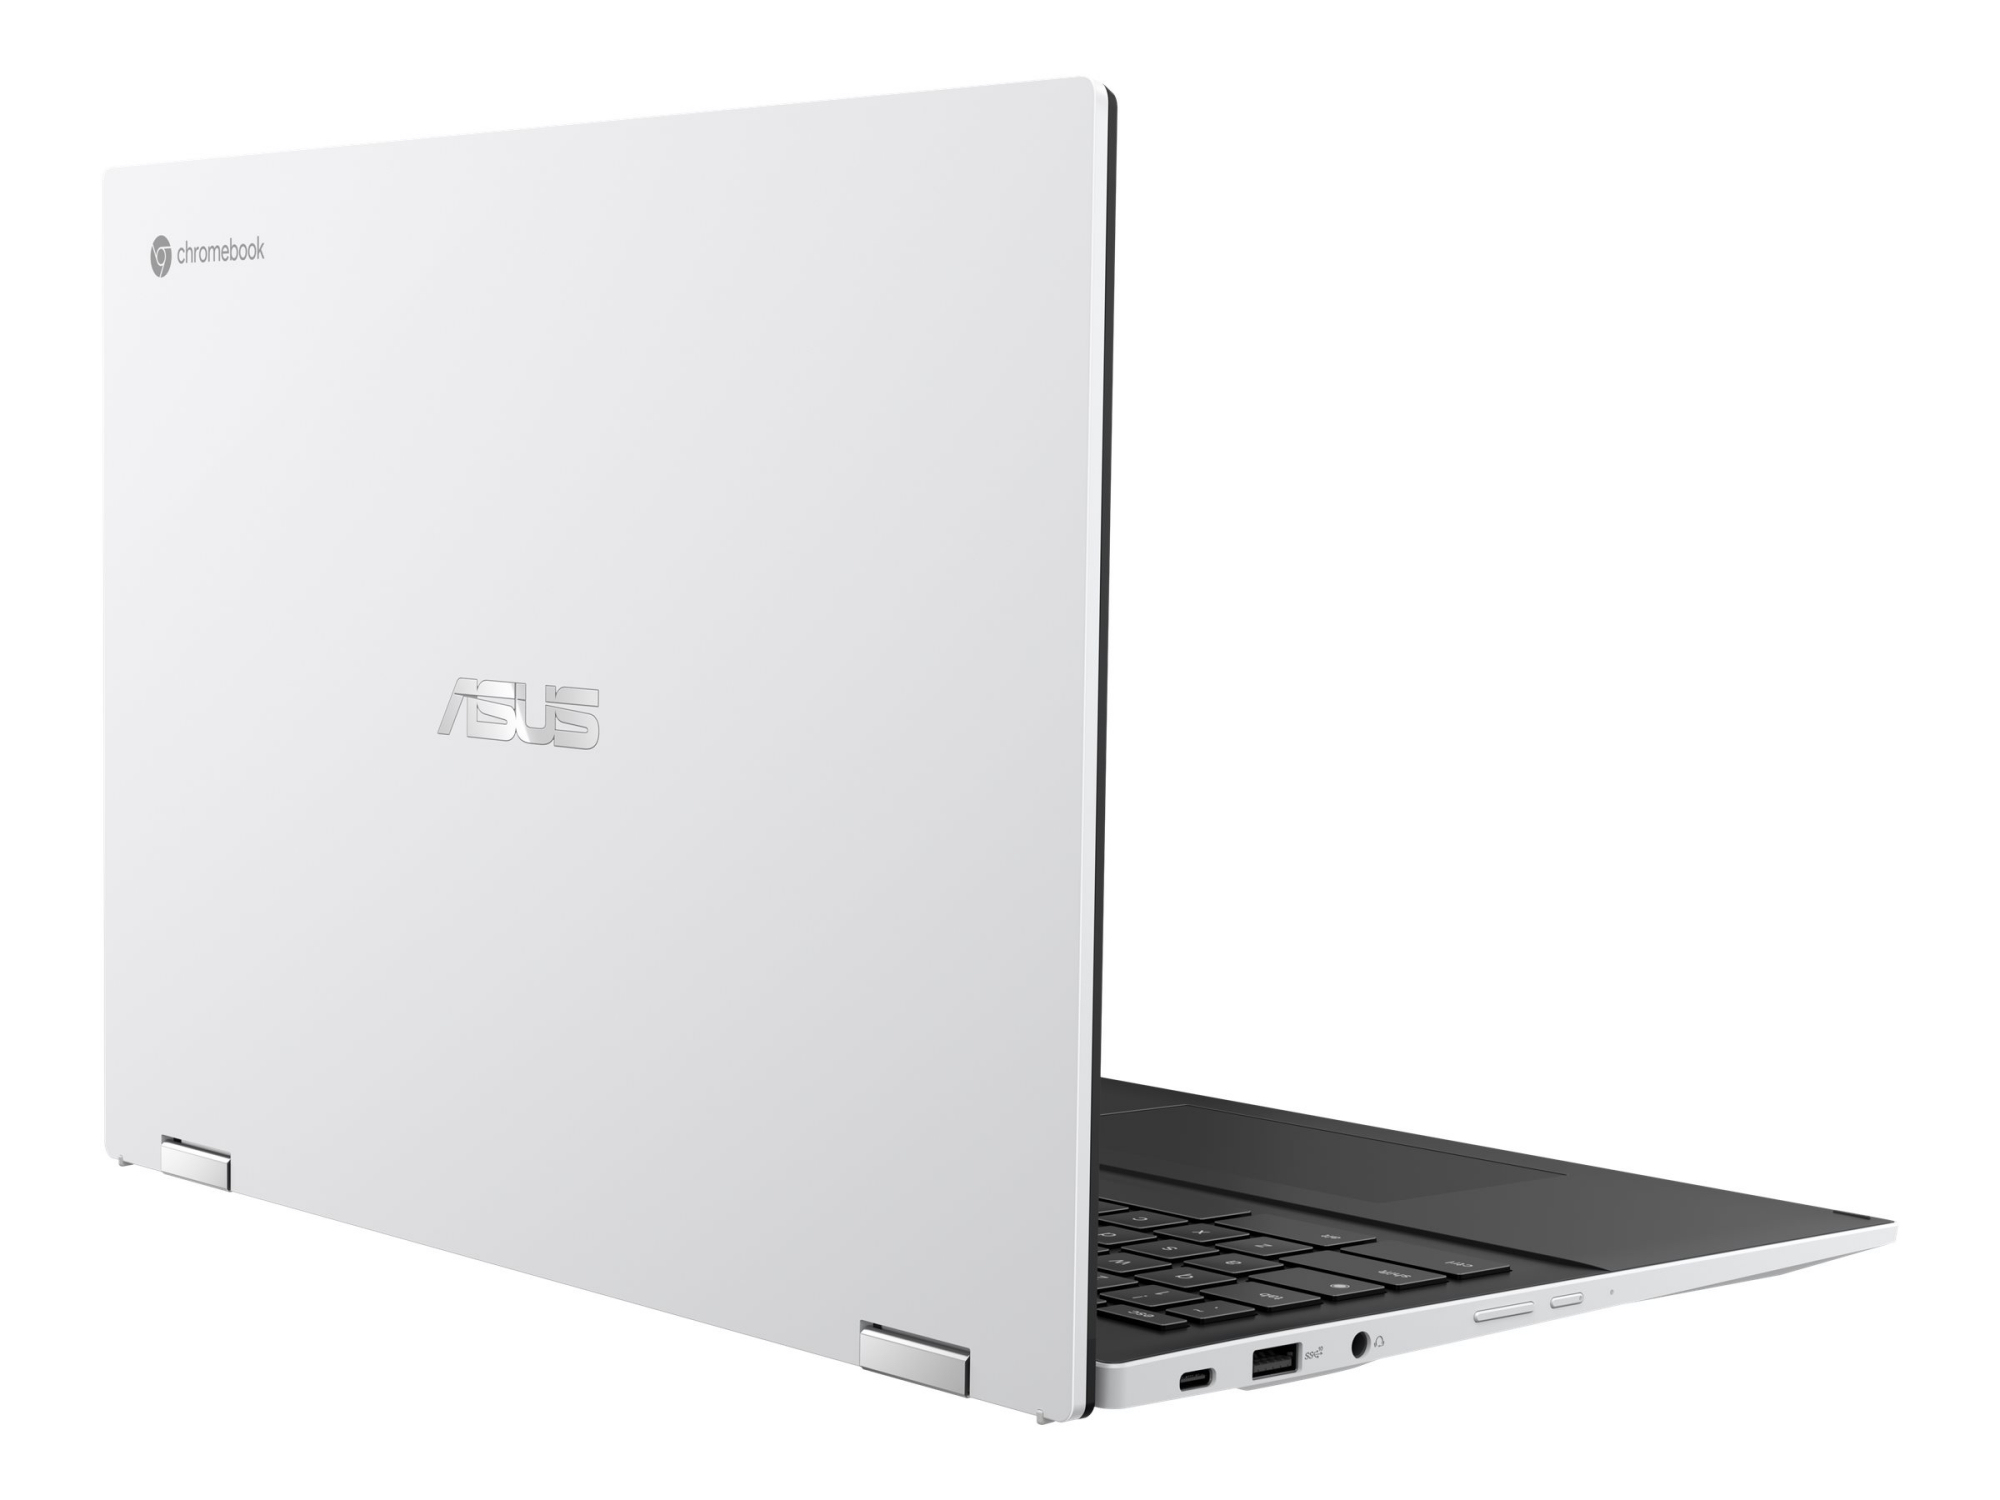 Asus Chromebook Flip CX5 in review: 1,200 Euros for a Chromebook 